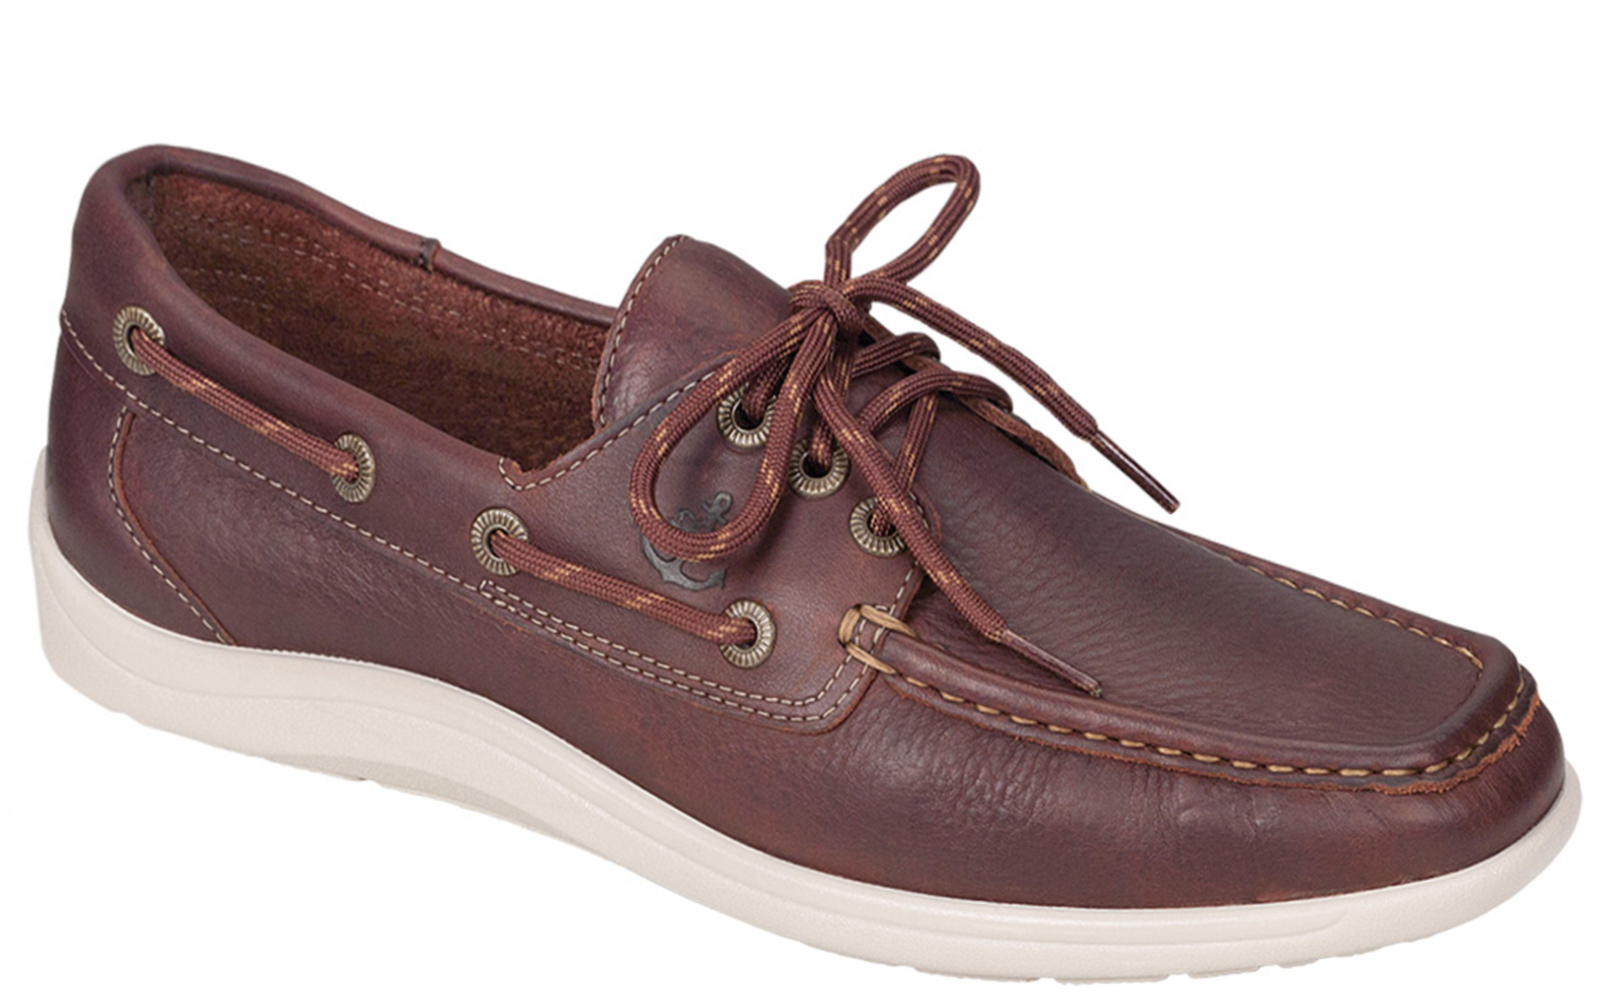 Sperry Pearlized Leather Boat Shoes Songfish - QVC.com